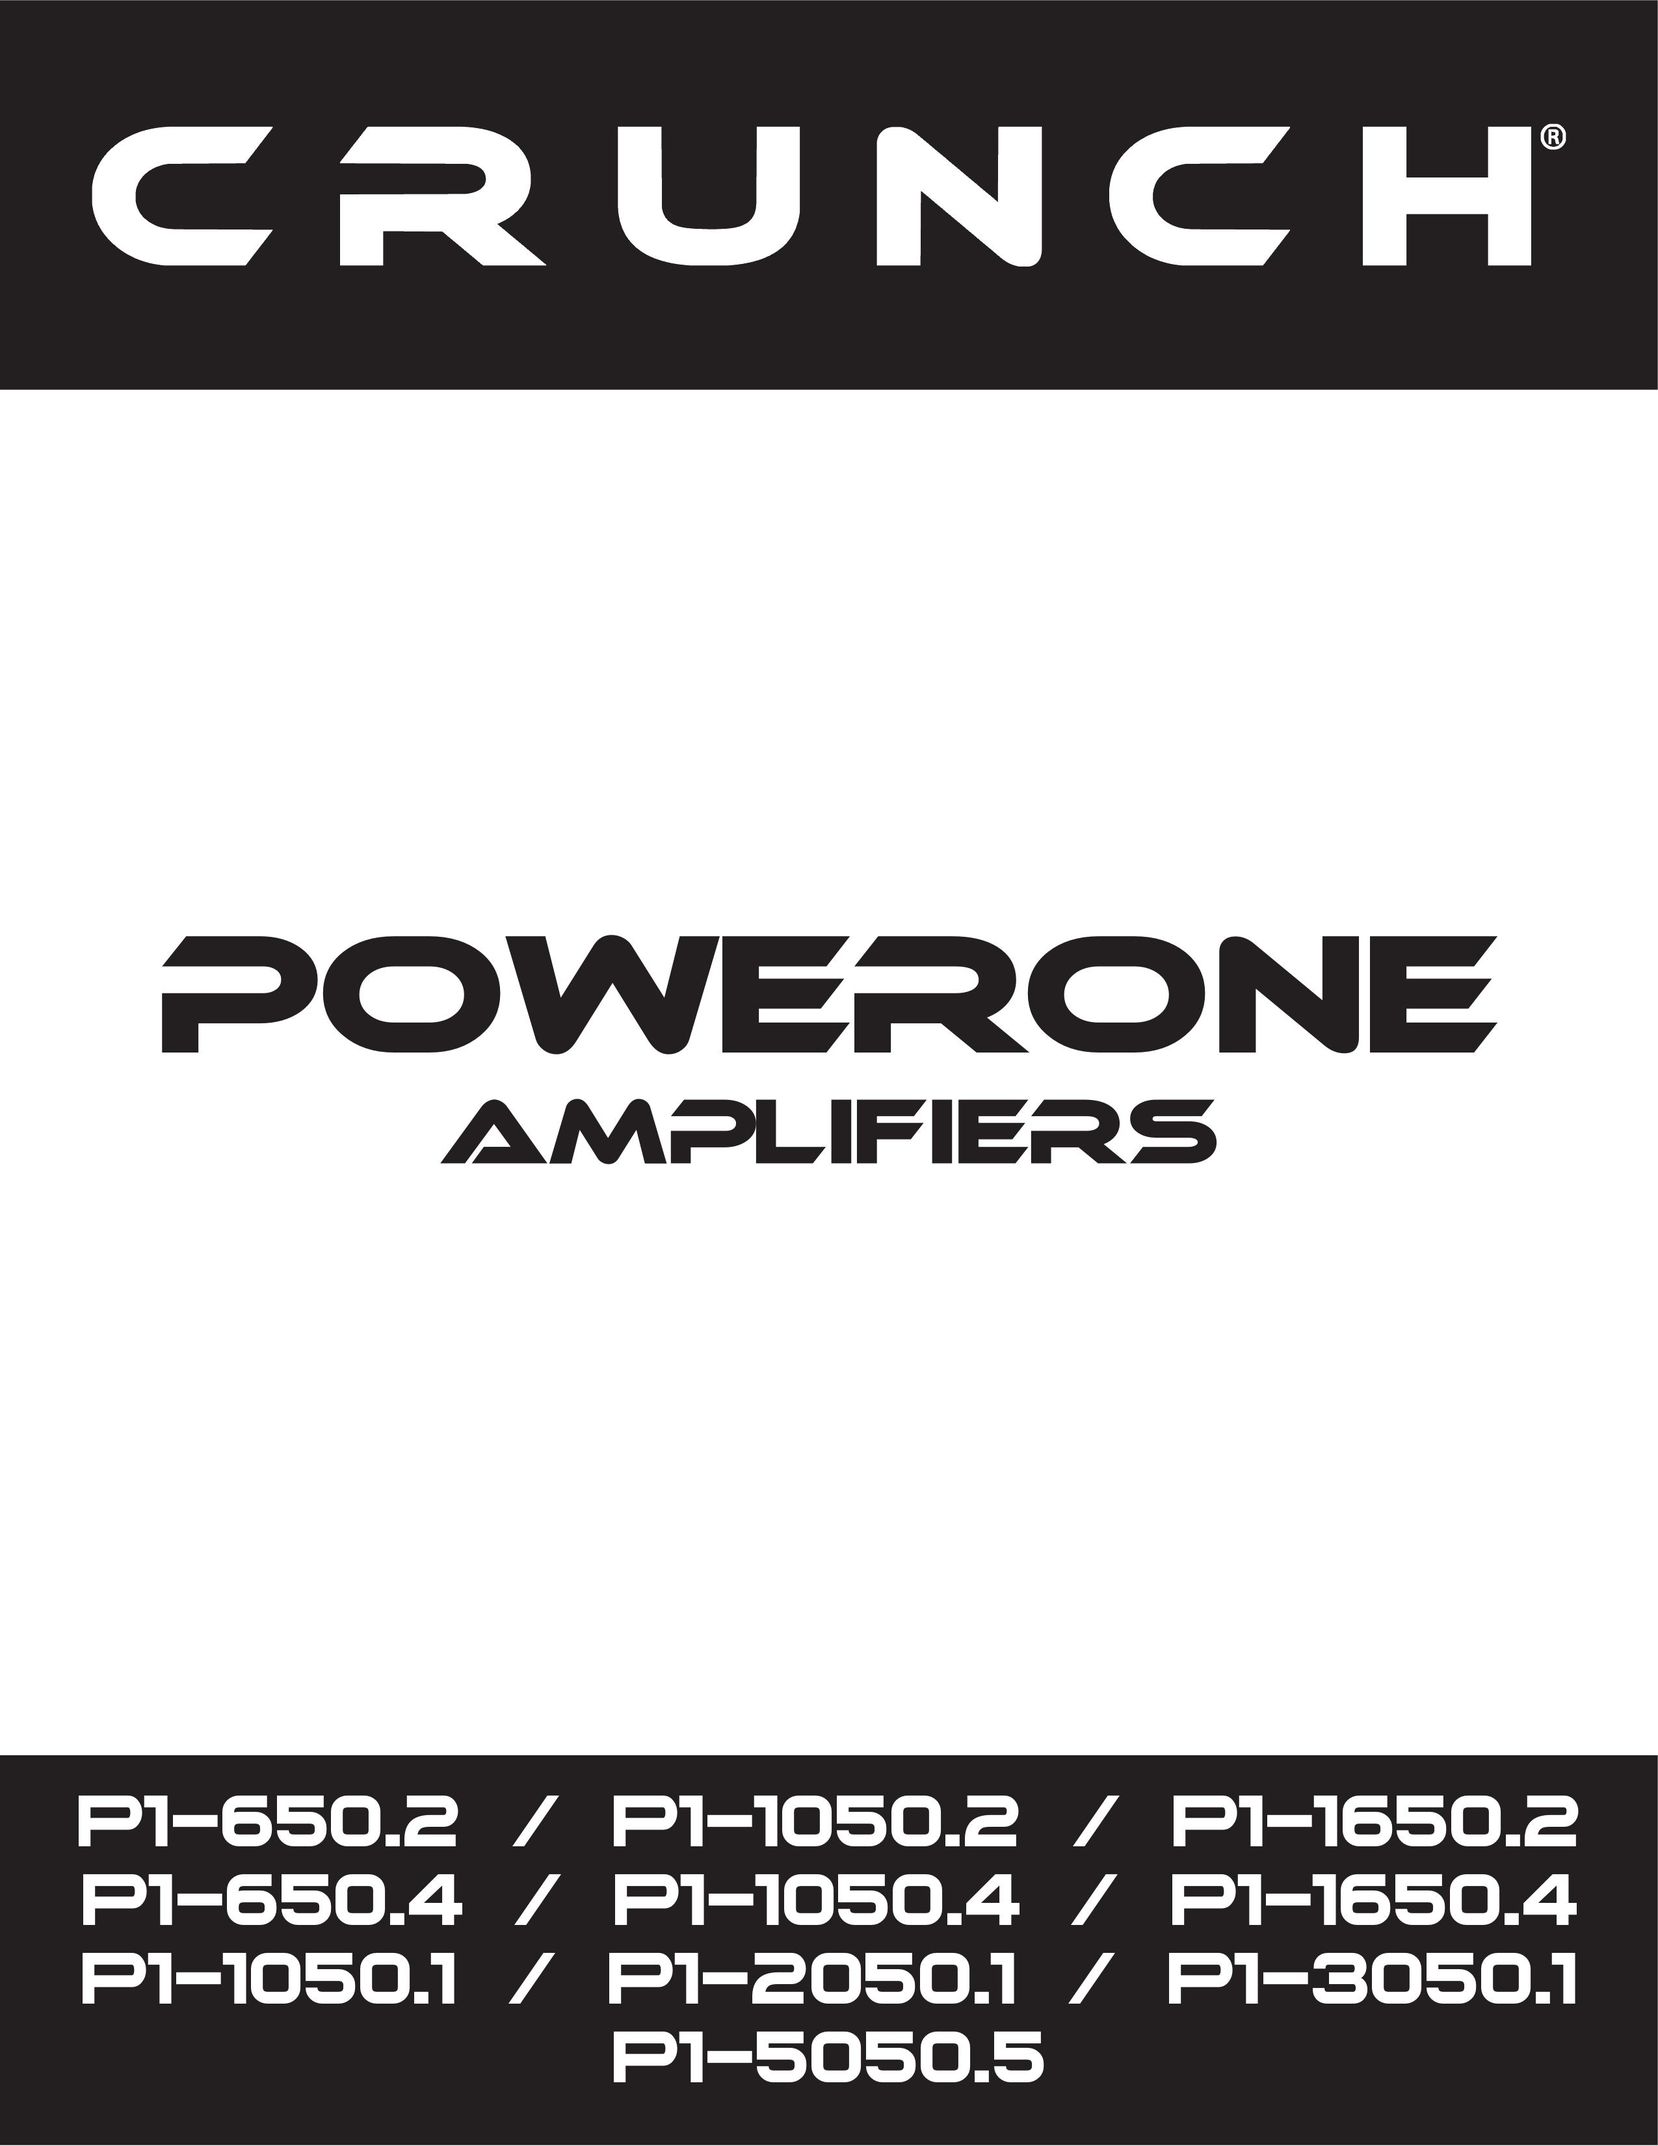 Crunch P1-2050.1 Stereo Amplifier User Manual